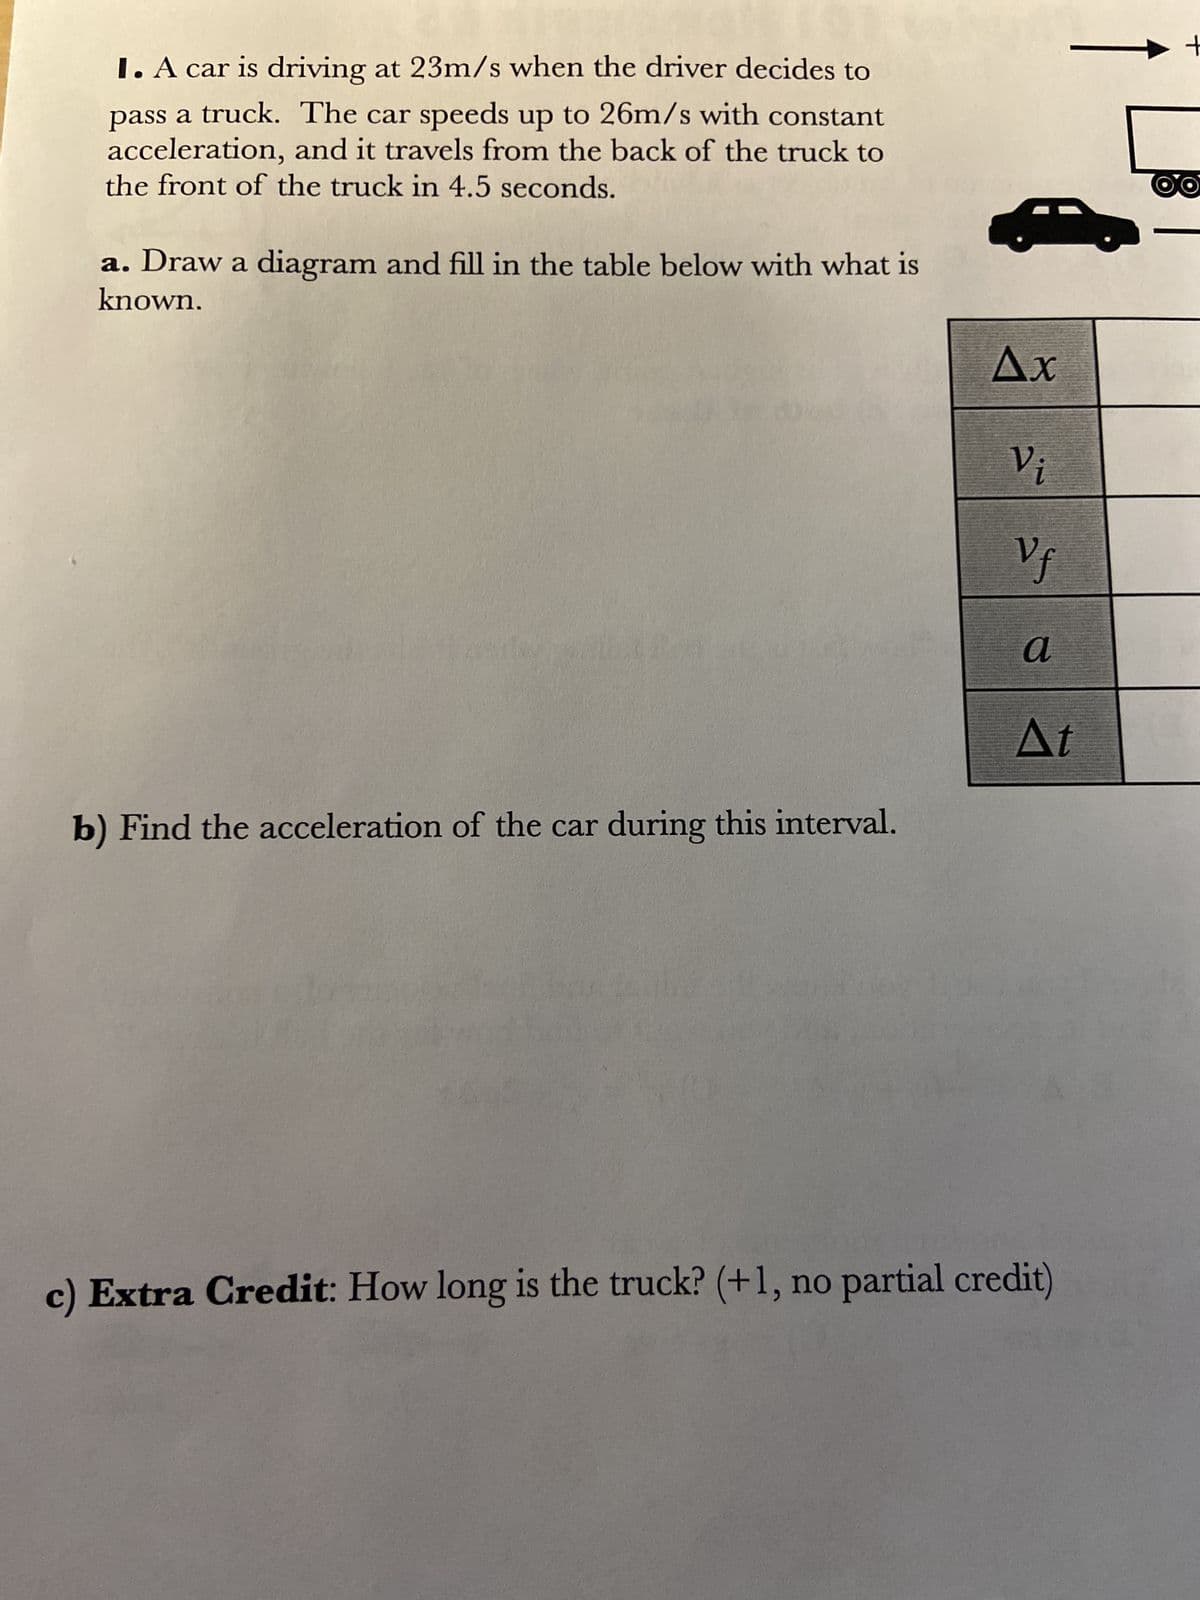 I. A car is driving at 23m/s when the driver decides to
pass a truck. The car speeds up to 26m/s with constant
acceleration, and it travels from the back of the truck to
the front of the truck in 4.5 seconds.
a. Draw a diagram and fill in the table below with what is
known.
b) Find the acceleration of the car during this interval.
Ax
Vi
Vf
a
At
c) Extra Credit: How long is the truck? (+1, no partial credit)
+